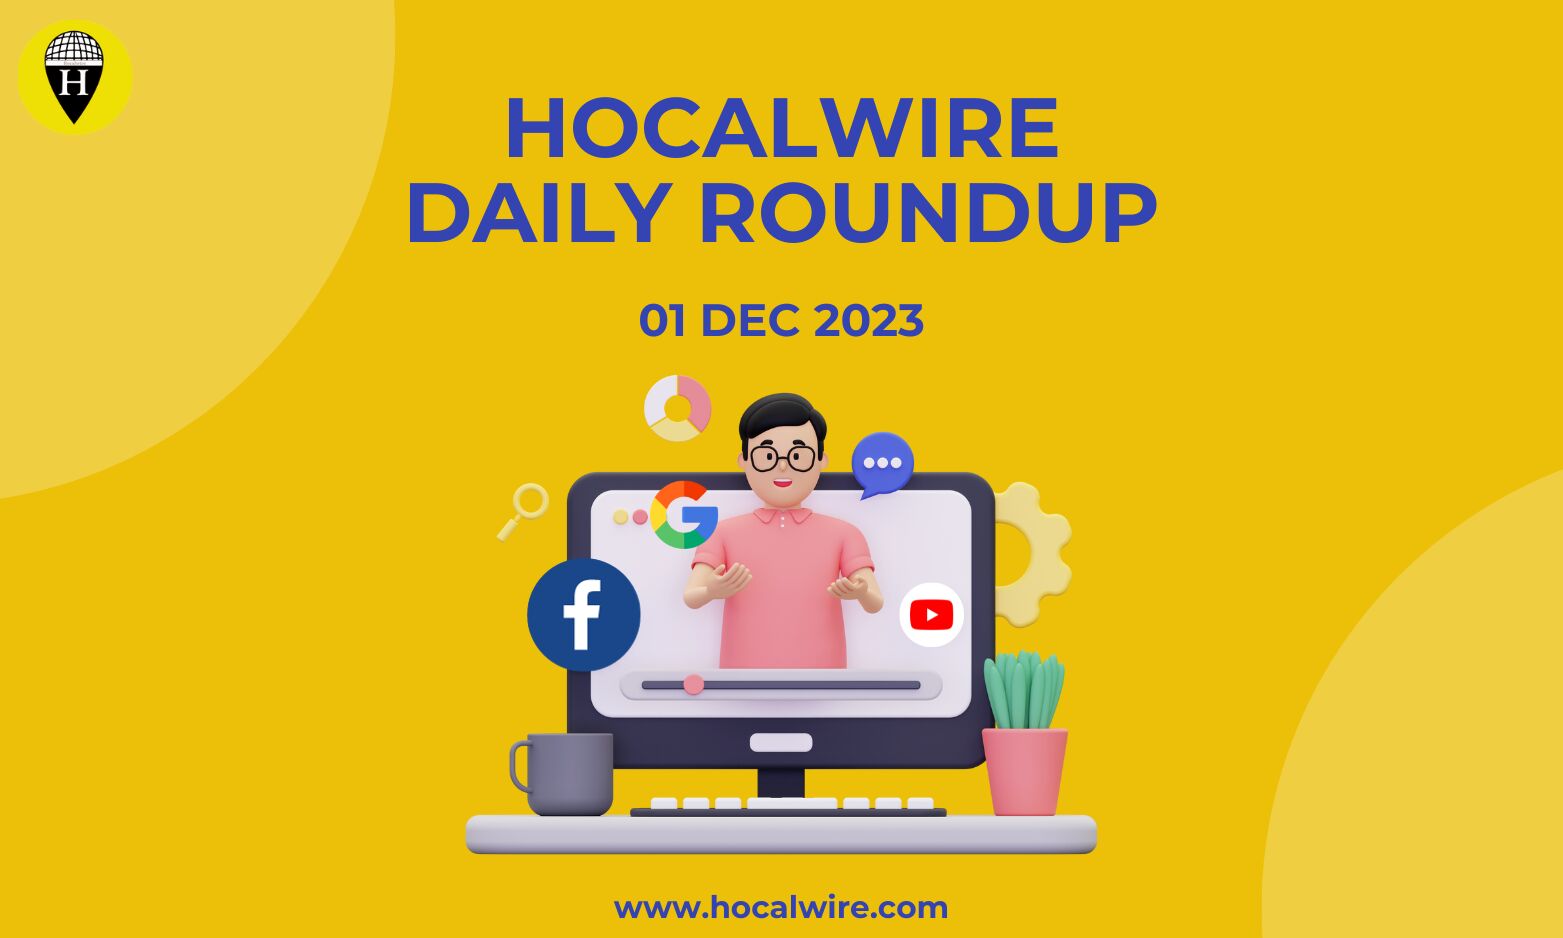 Hocalwire Daily Roundup | Firefox Takes a Stand: URL Tracking Removal Sparks Privacy Trend Watch